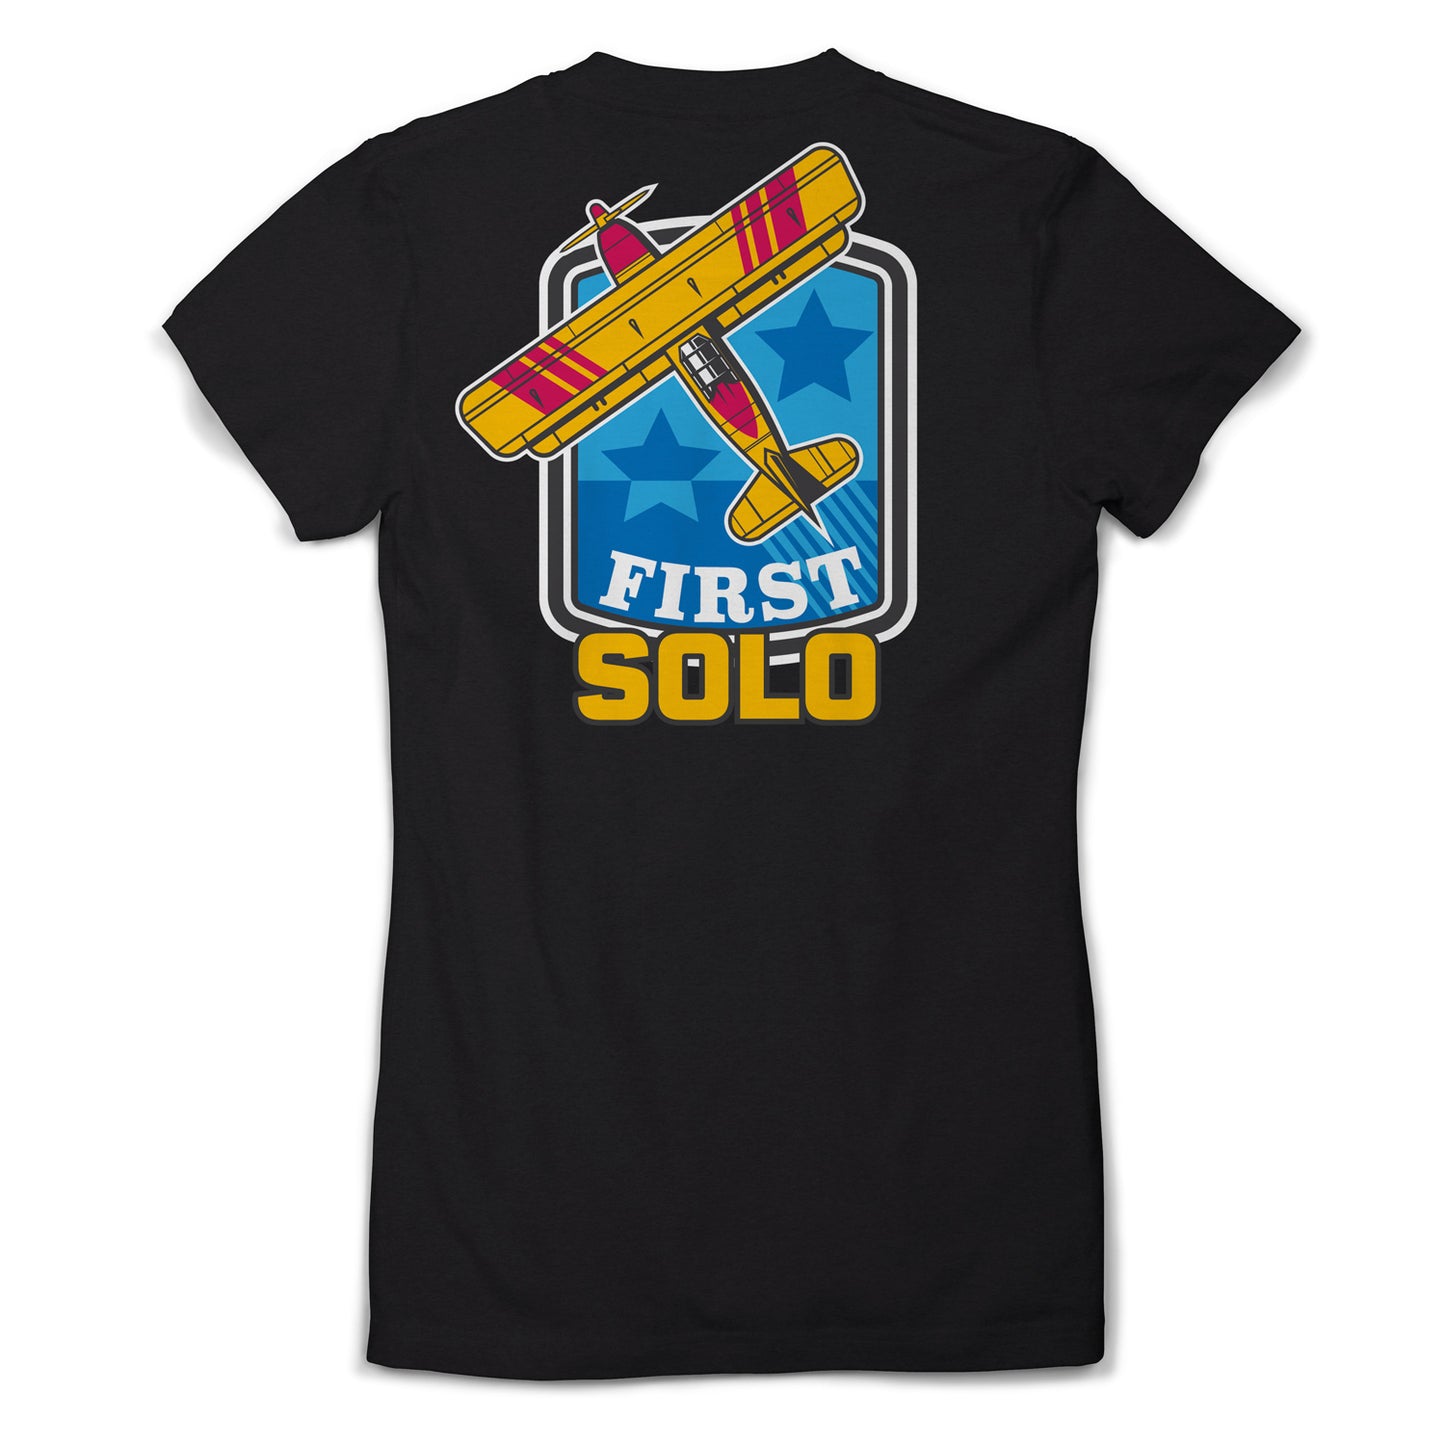 First Solo Retro T-shirt